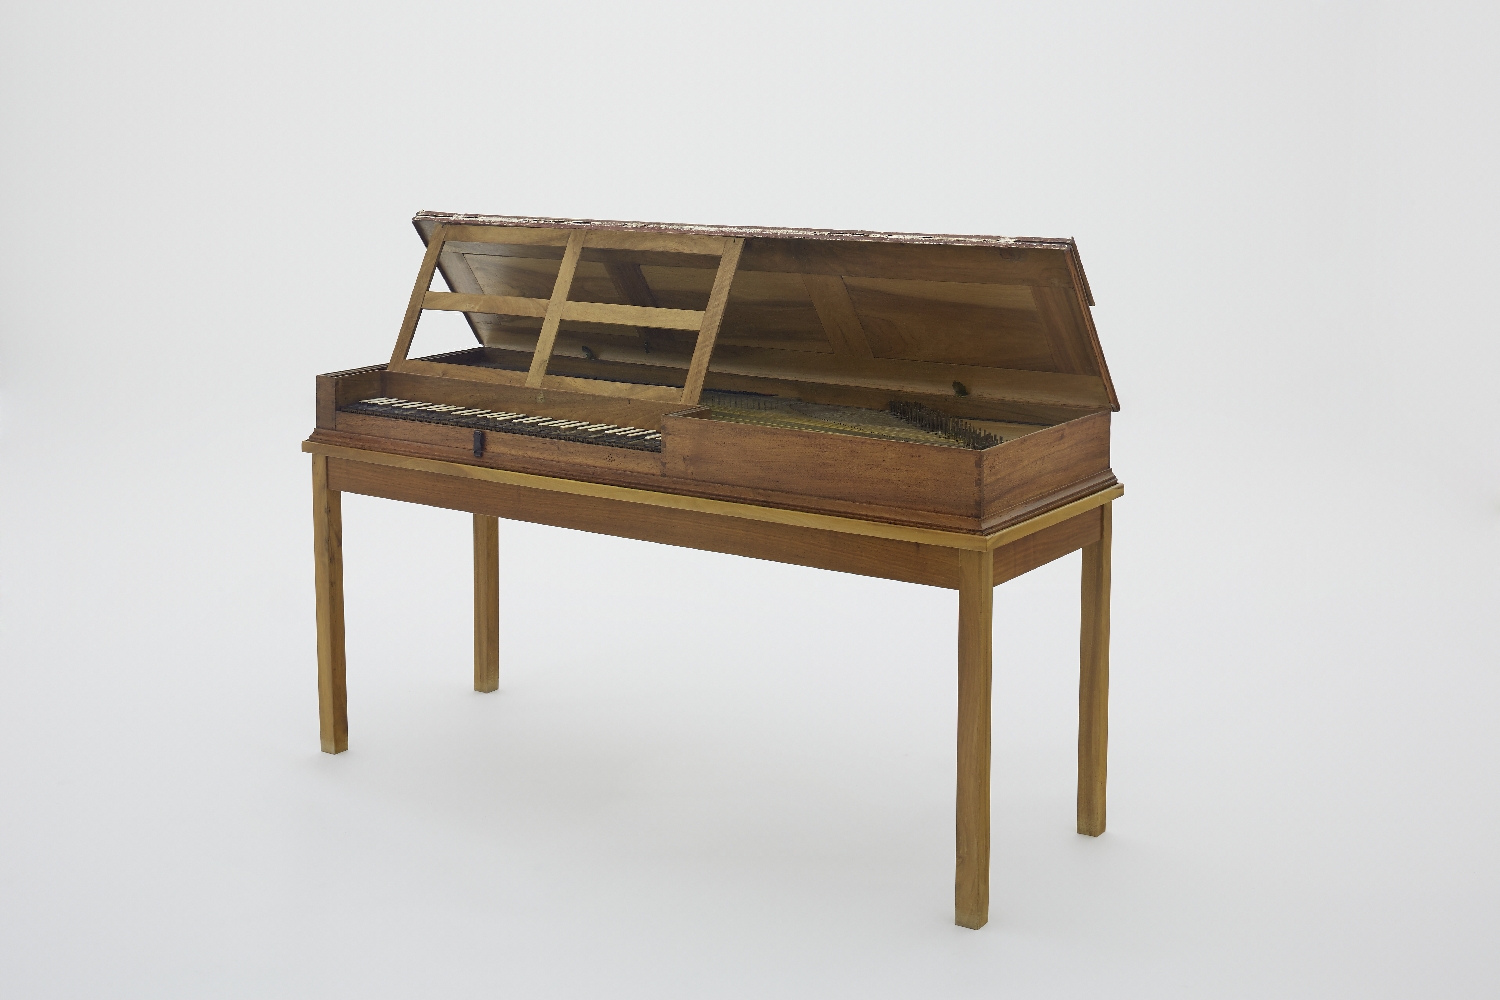 Clavichord owned by Baroness Maria Anna von Berchtold zu Sonnenburg, née Mozart, unknown instrument maker, Germany, late 18th c., wood, ivory, metal, inv. no. MI 1264